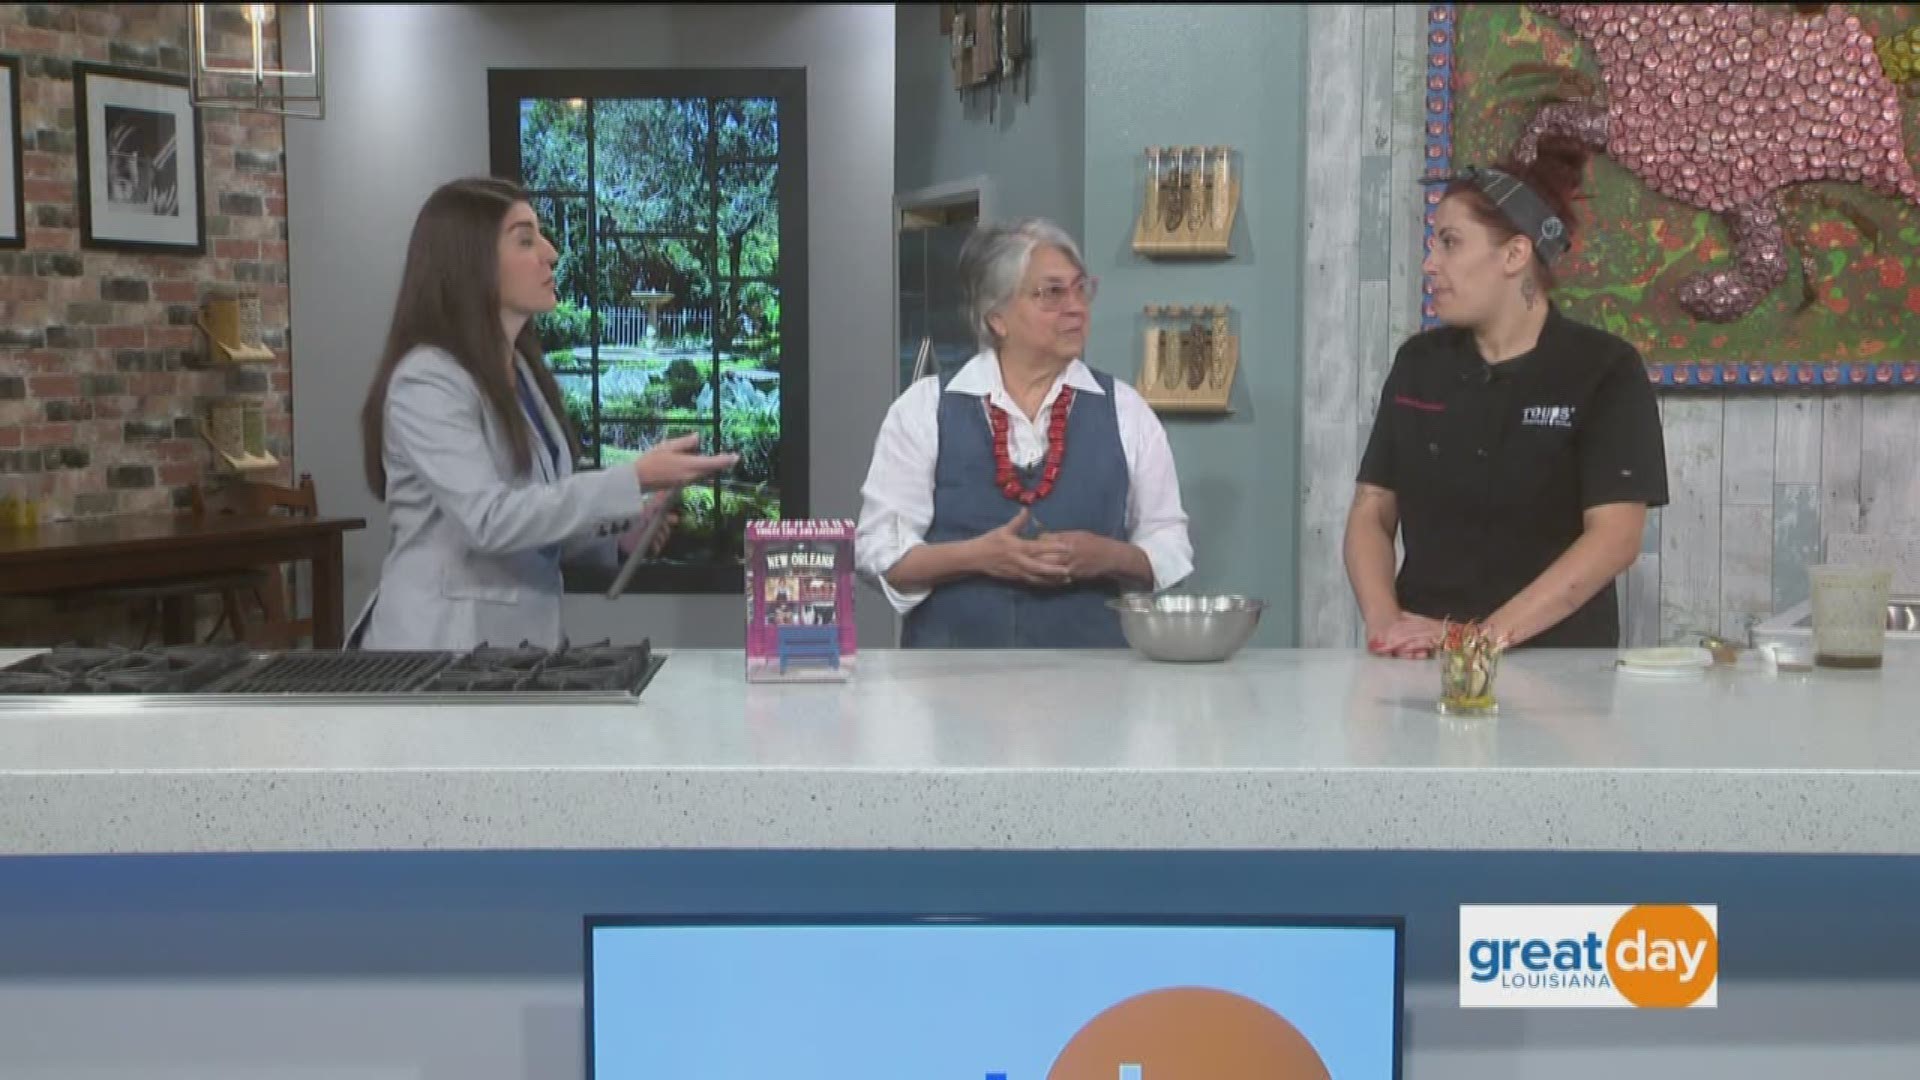 The temperatures are heating up and so is the menu at Toup's Meatery. Here to highlight some Summer menu items are Liz Williams and Chef Courtney Hellenschmidt with Toups Meatery.